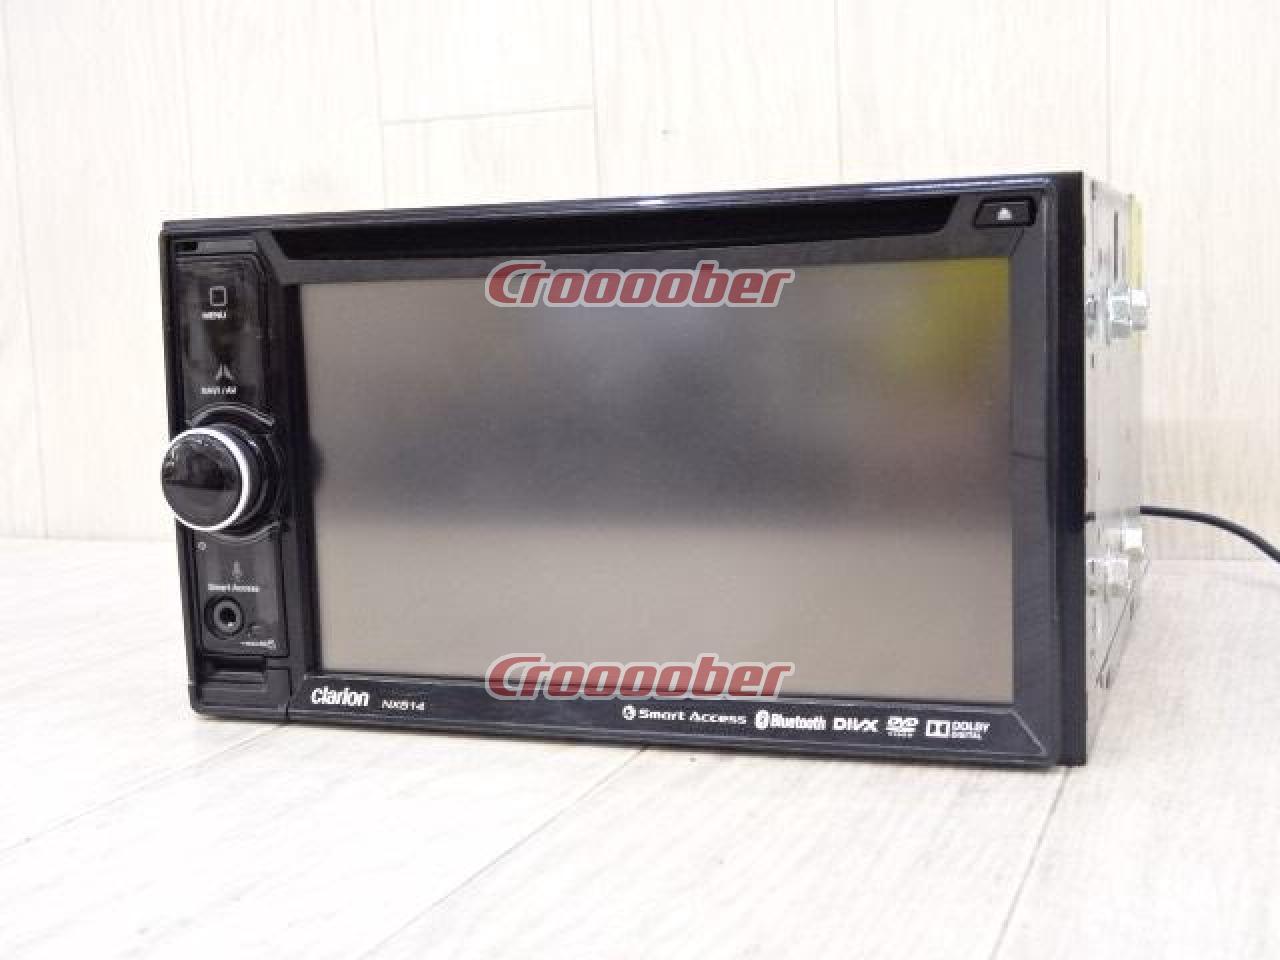 Clarion NX514 □ 2014 Model Supports DVD/CD/MicroSD/Bluetooth